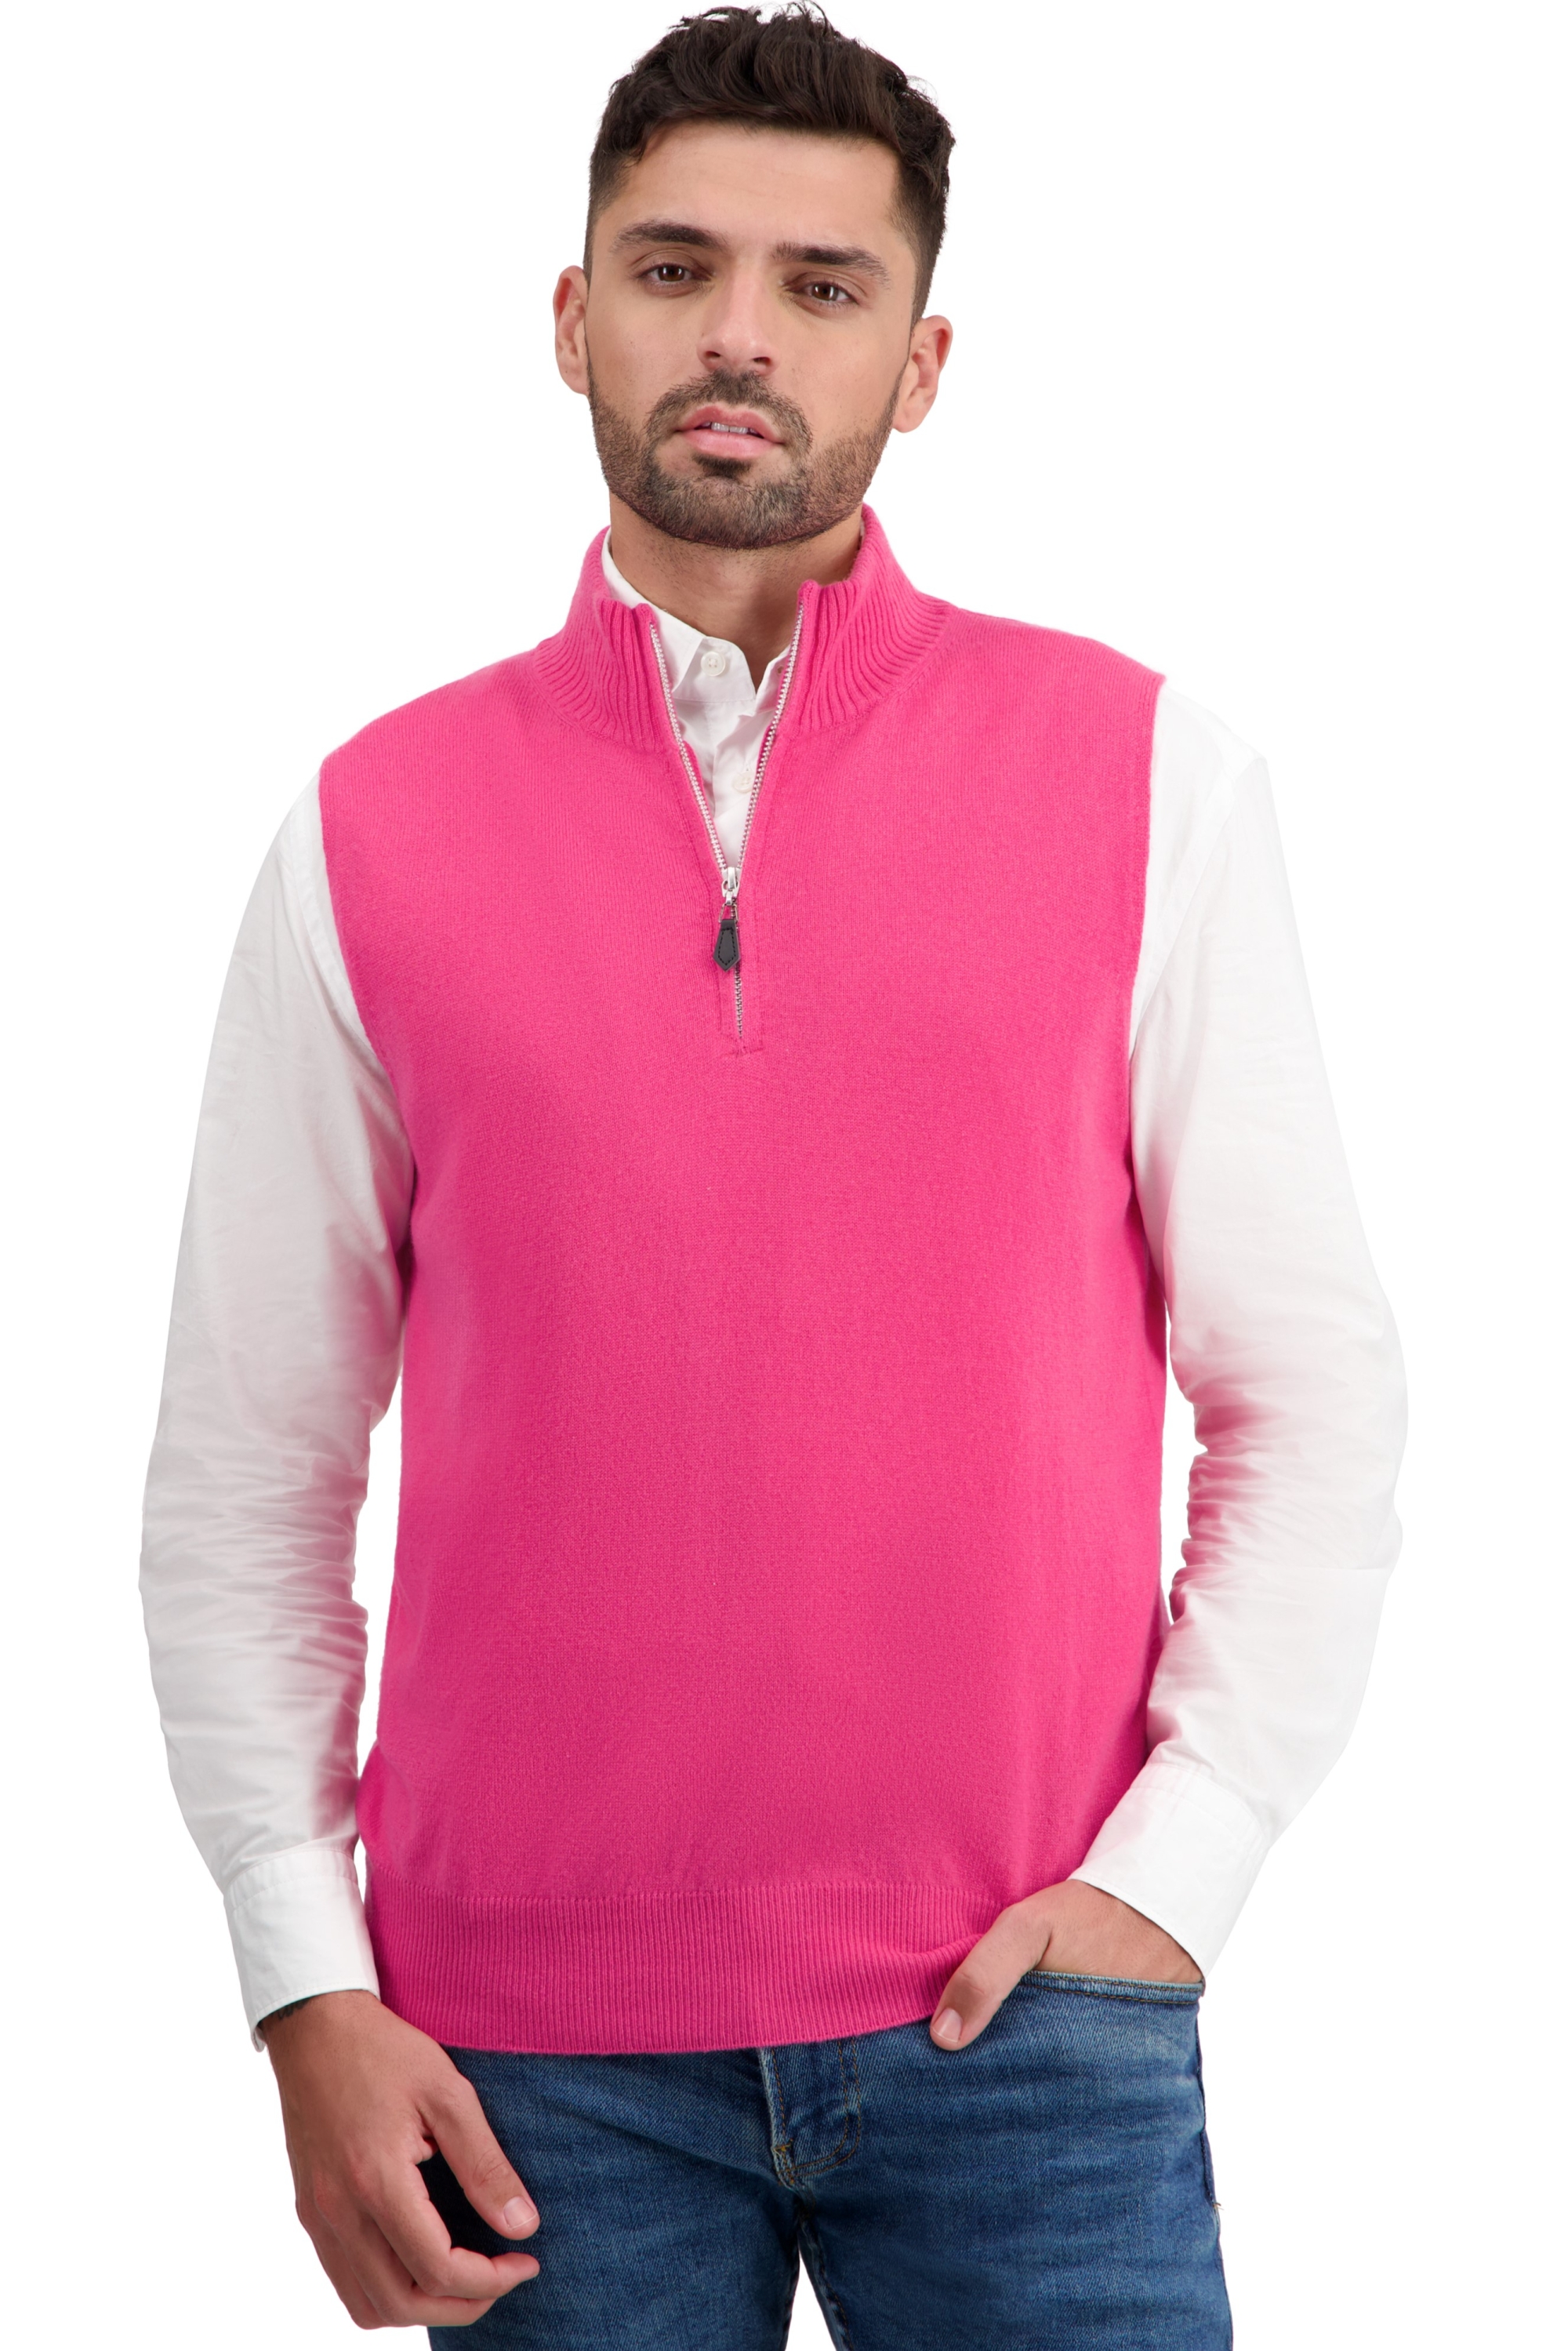 Cachemire polo camionneur homme texas rose shocking s